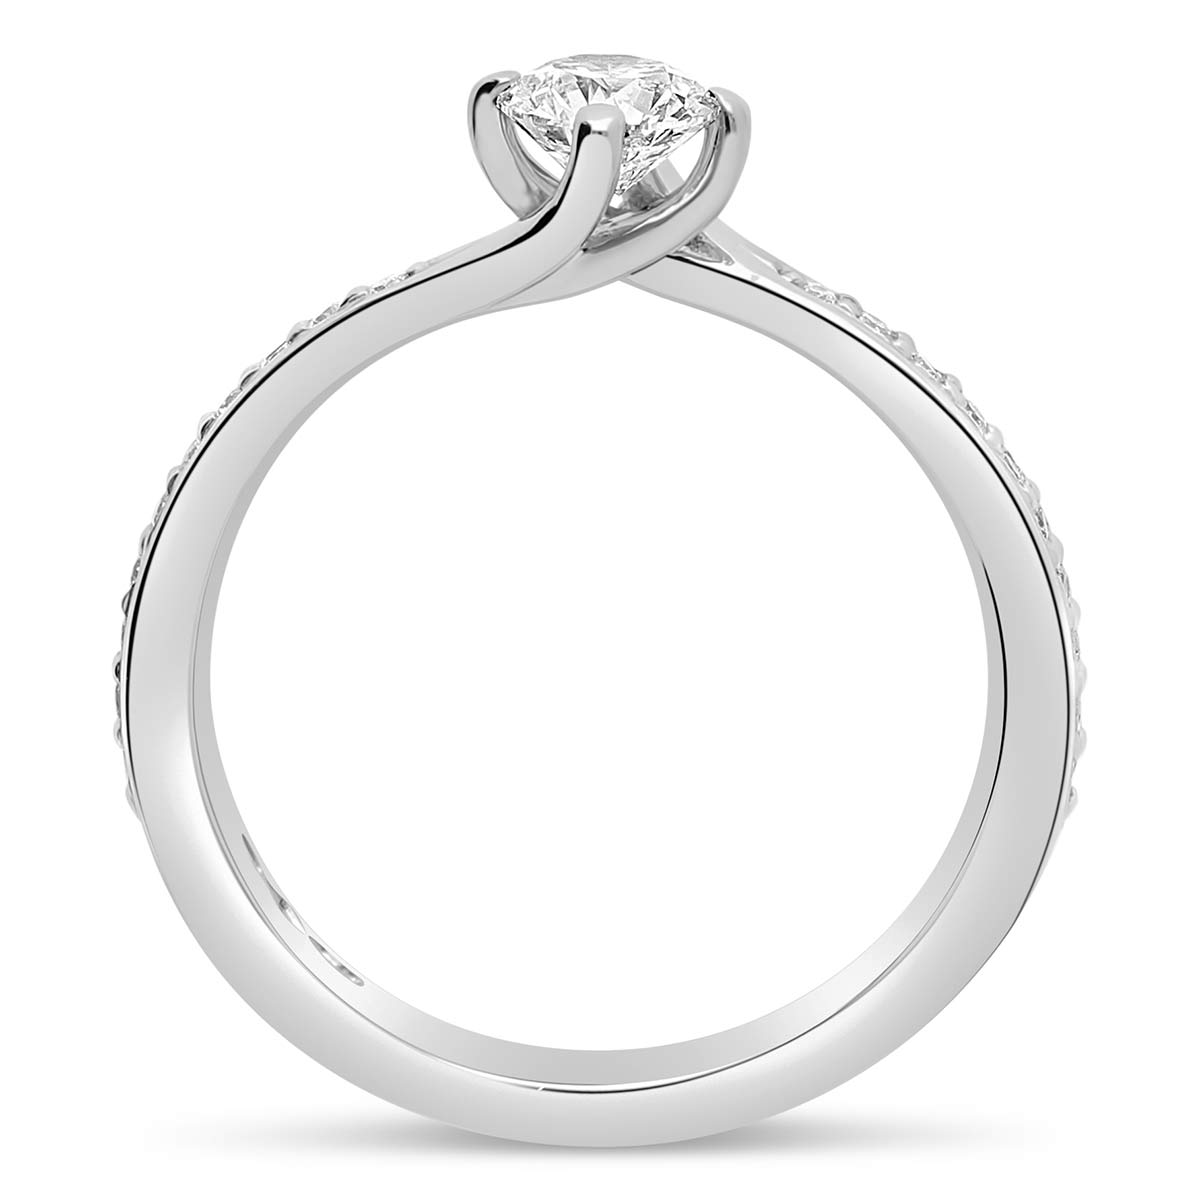 hivaoa-solitaires-diamants-certifies-accompagne-or-blanc-750-